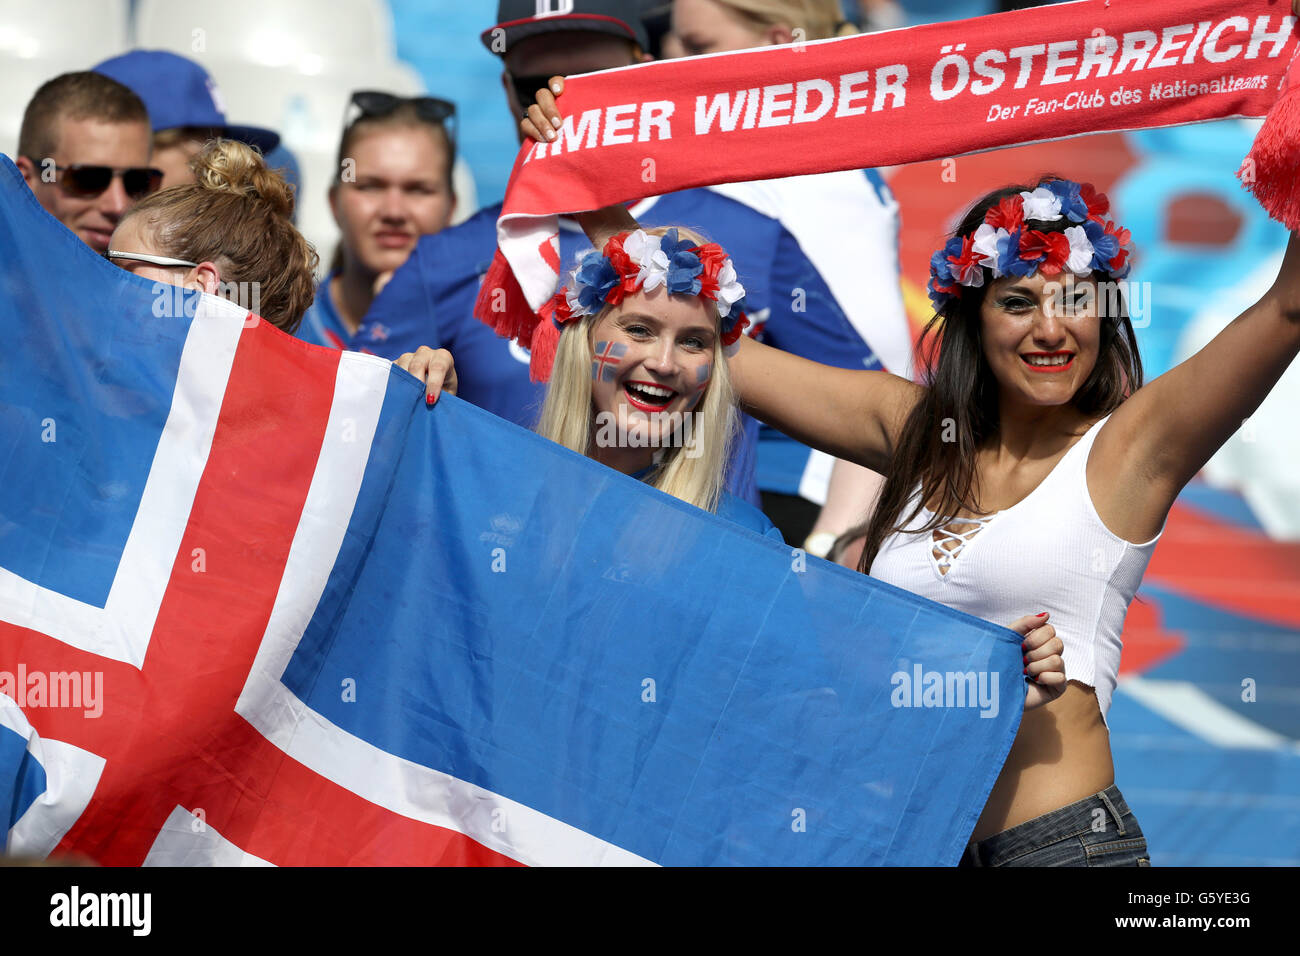 Iceland fans cheer on their side in the stands before the Euro 2016, Group F match at the Stade de France, Paris. PRESS ASSOCIATION Photo. Picture date: Wednesday June 22, 2016. See PA story soccer Iceland. Photo credit should read: Owen Humphreys/PA Wire. RESTRICTIONS: Use subject to restrictions. Editorial use only. Book and magazine sales permitted providing not solely devoted to any one team/player/match. No commercial use. Call +44 (0)1158 447447 for further information. Stock Photo